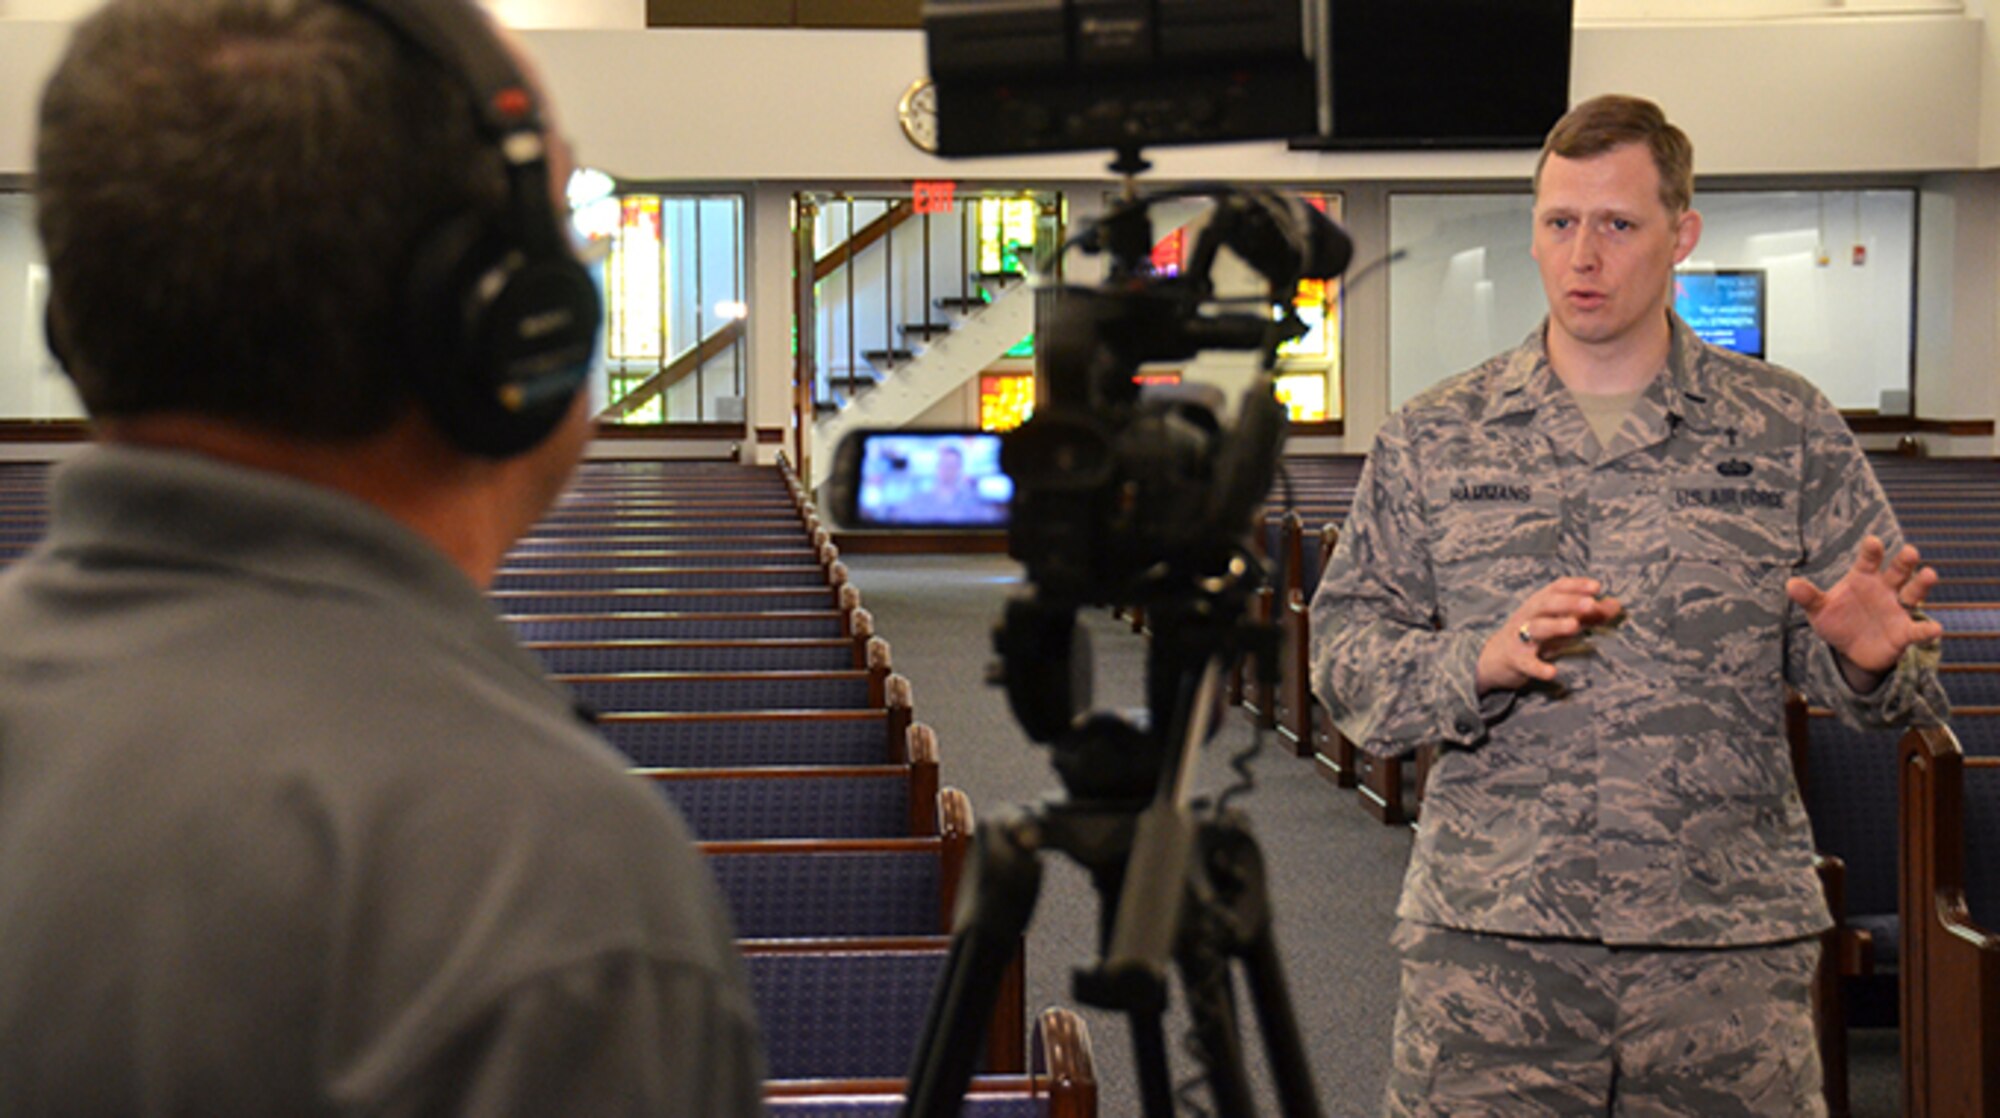 Chaplain (1st Lt.) Joshua Hammans, 78th Air Base Wing chaplain, speaks about resiliency and spirituality during the video session for a brand-new product focusing on resiliency.  The short video clips will be posted on the Robins Air Force Base Facebook page every other Wednesday beginning March 15. (U.S. Air Force photo/Tech. Sgt. Kelly Goonan)
